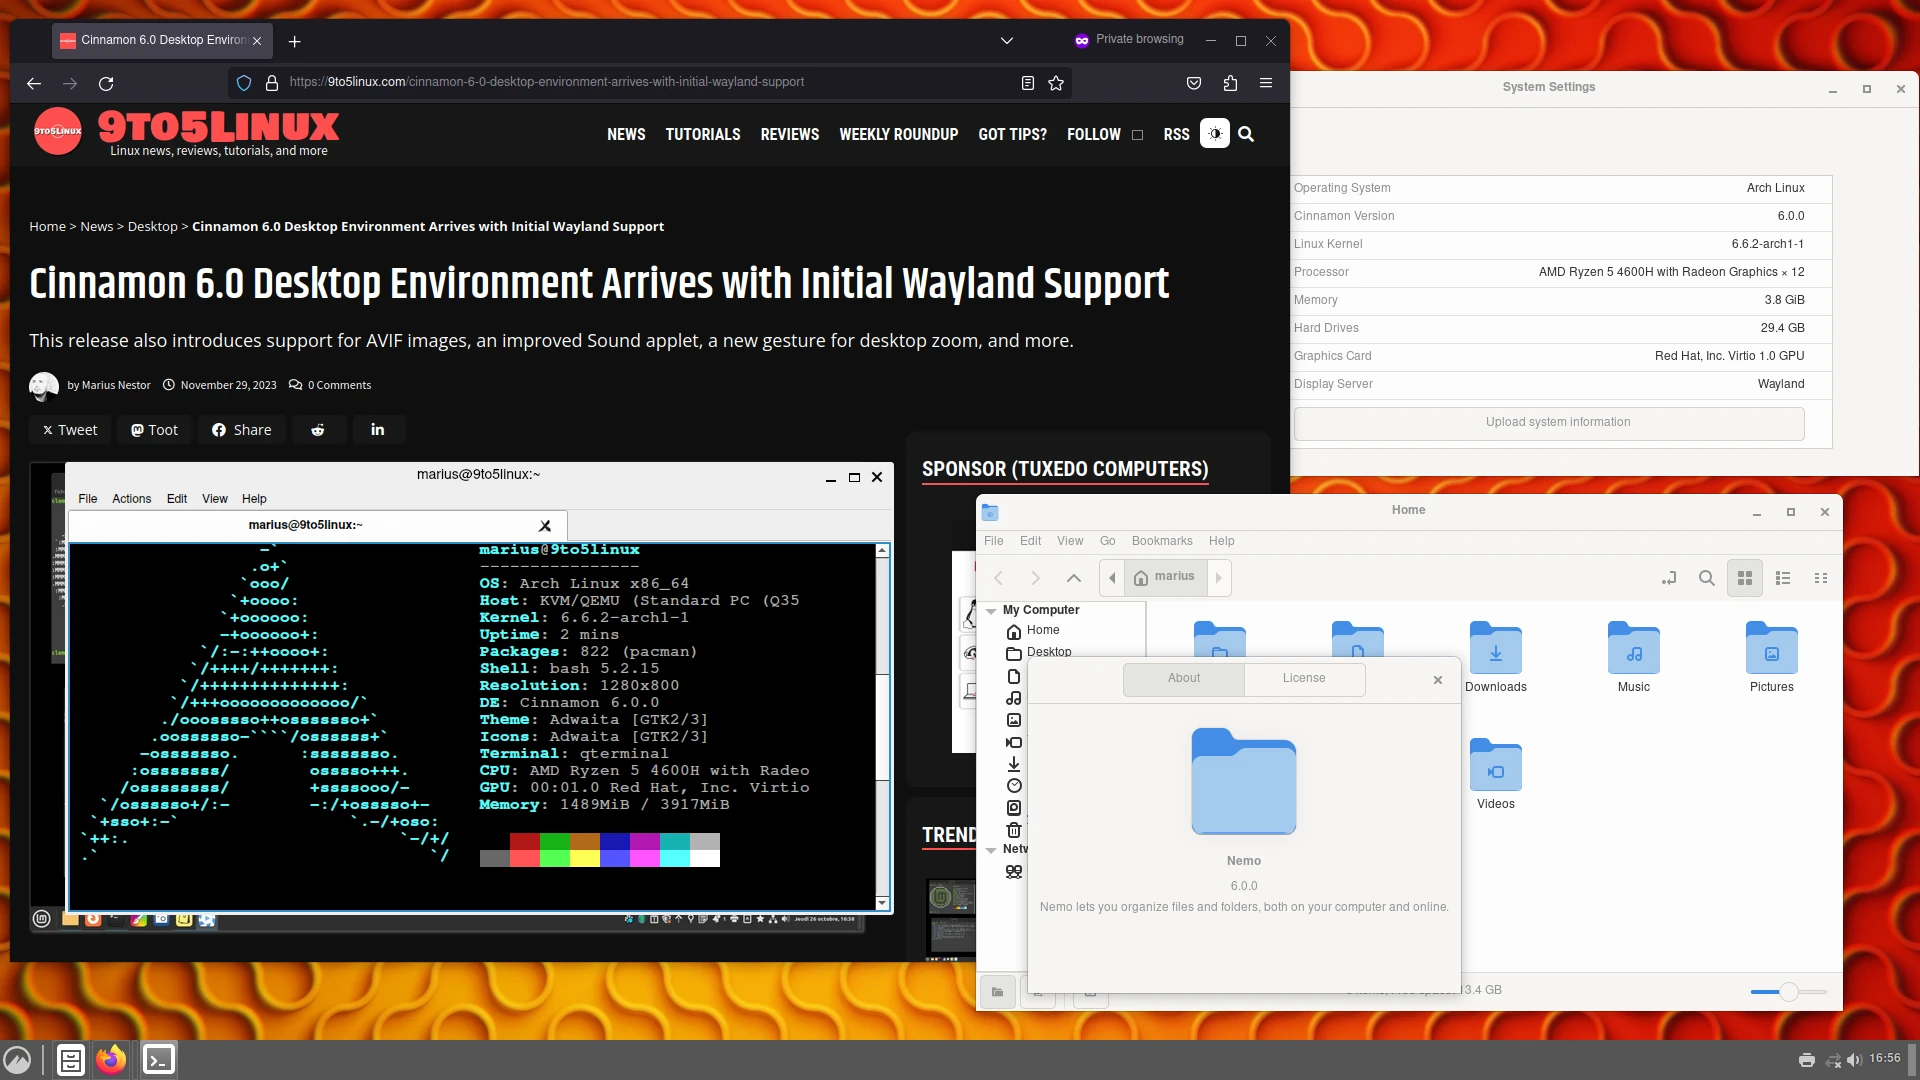 Cinnamon 6.0 Desktop Environment Arrives with Initial Wayland Support